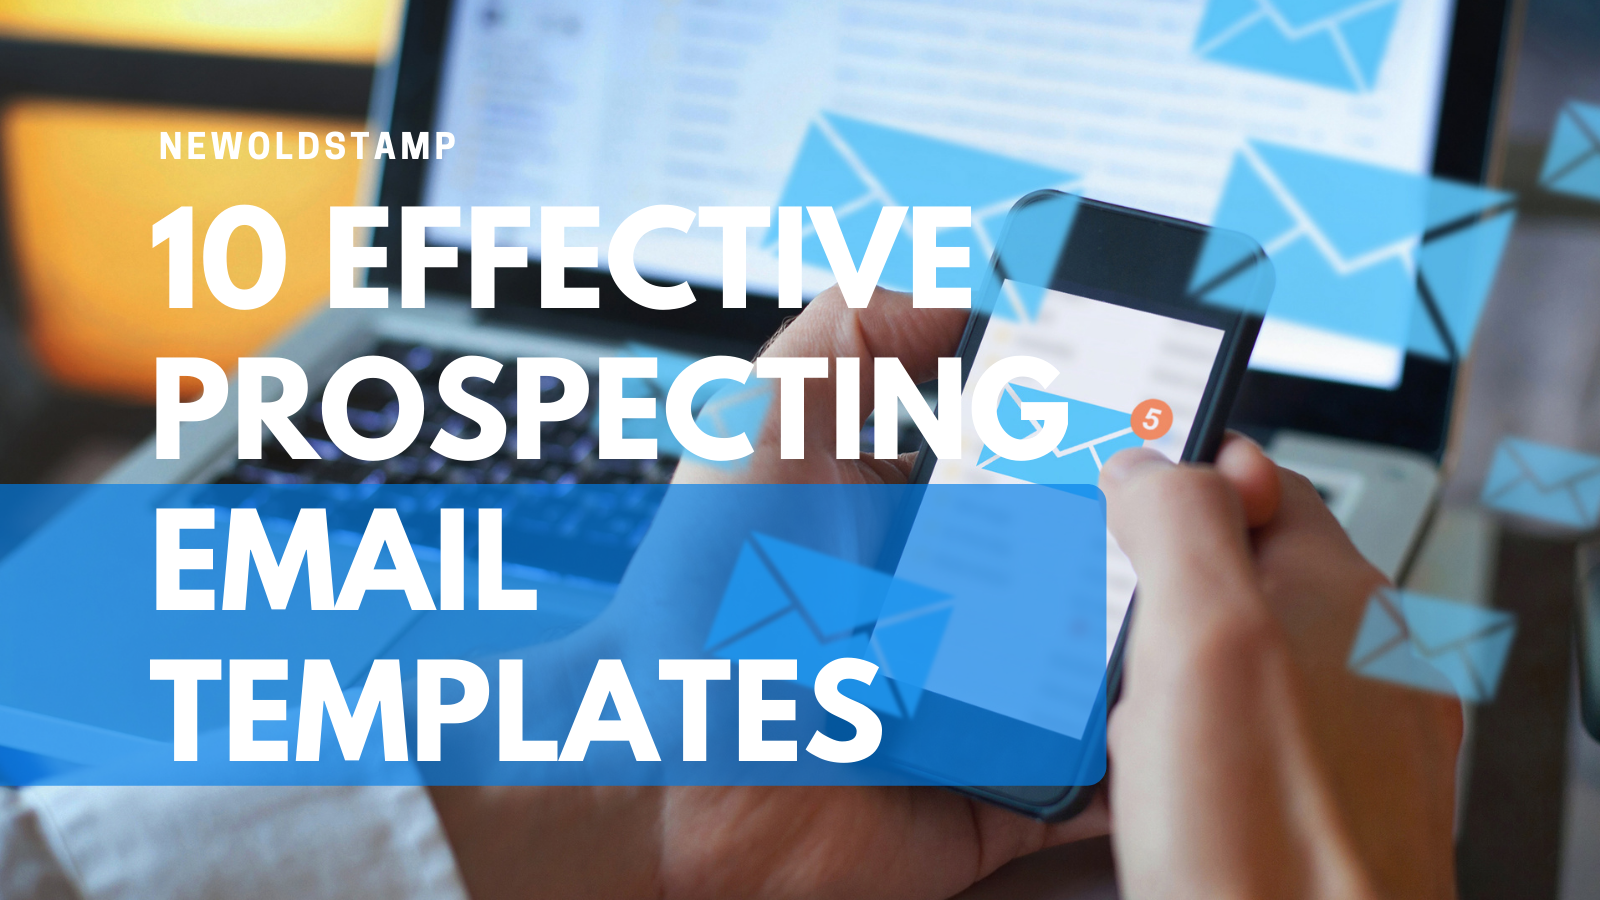 10-effective-prospecting-email-templates-newoldstamp